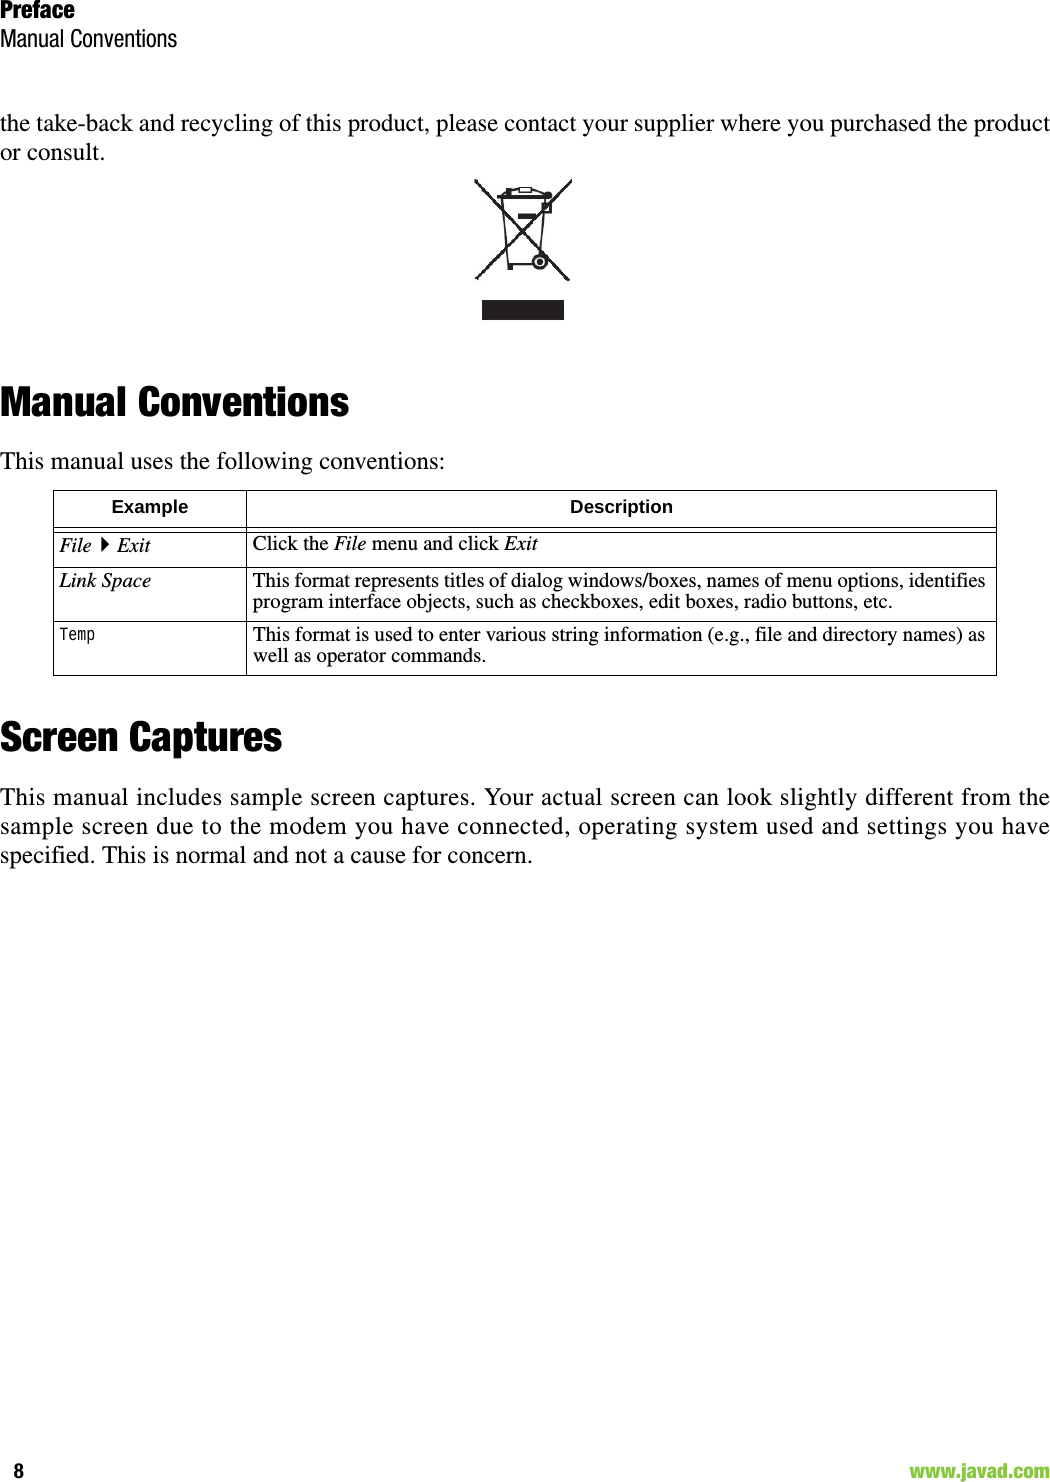 PrefaceManual Conventions8                                                                                                                    www.javad.comthe take-back and recycling of this product, please contact your supplier where you purchased the productor consult. Manual ConventionsThis manual uses the following conventions:Screen CapturesThis manual includes sample screen captures. Your actual screen can look slightly different from thesample screen due to the modem you have connected, operating system used and settings you havespecified. This is normal and not a cause for concern.Example DescriptionFileExit Click the File menu and click ExitLink Space This format represents titles of dialog windows/boxes, names of menu options, identifies program interface objects, such as checkboxes, edit boxes, radio buttons, etc.TempThis format is used to enter various string information (e.g., file and directory names) as well as operator commands.